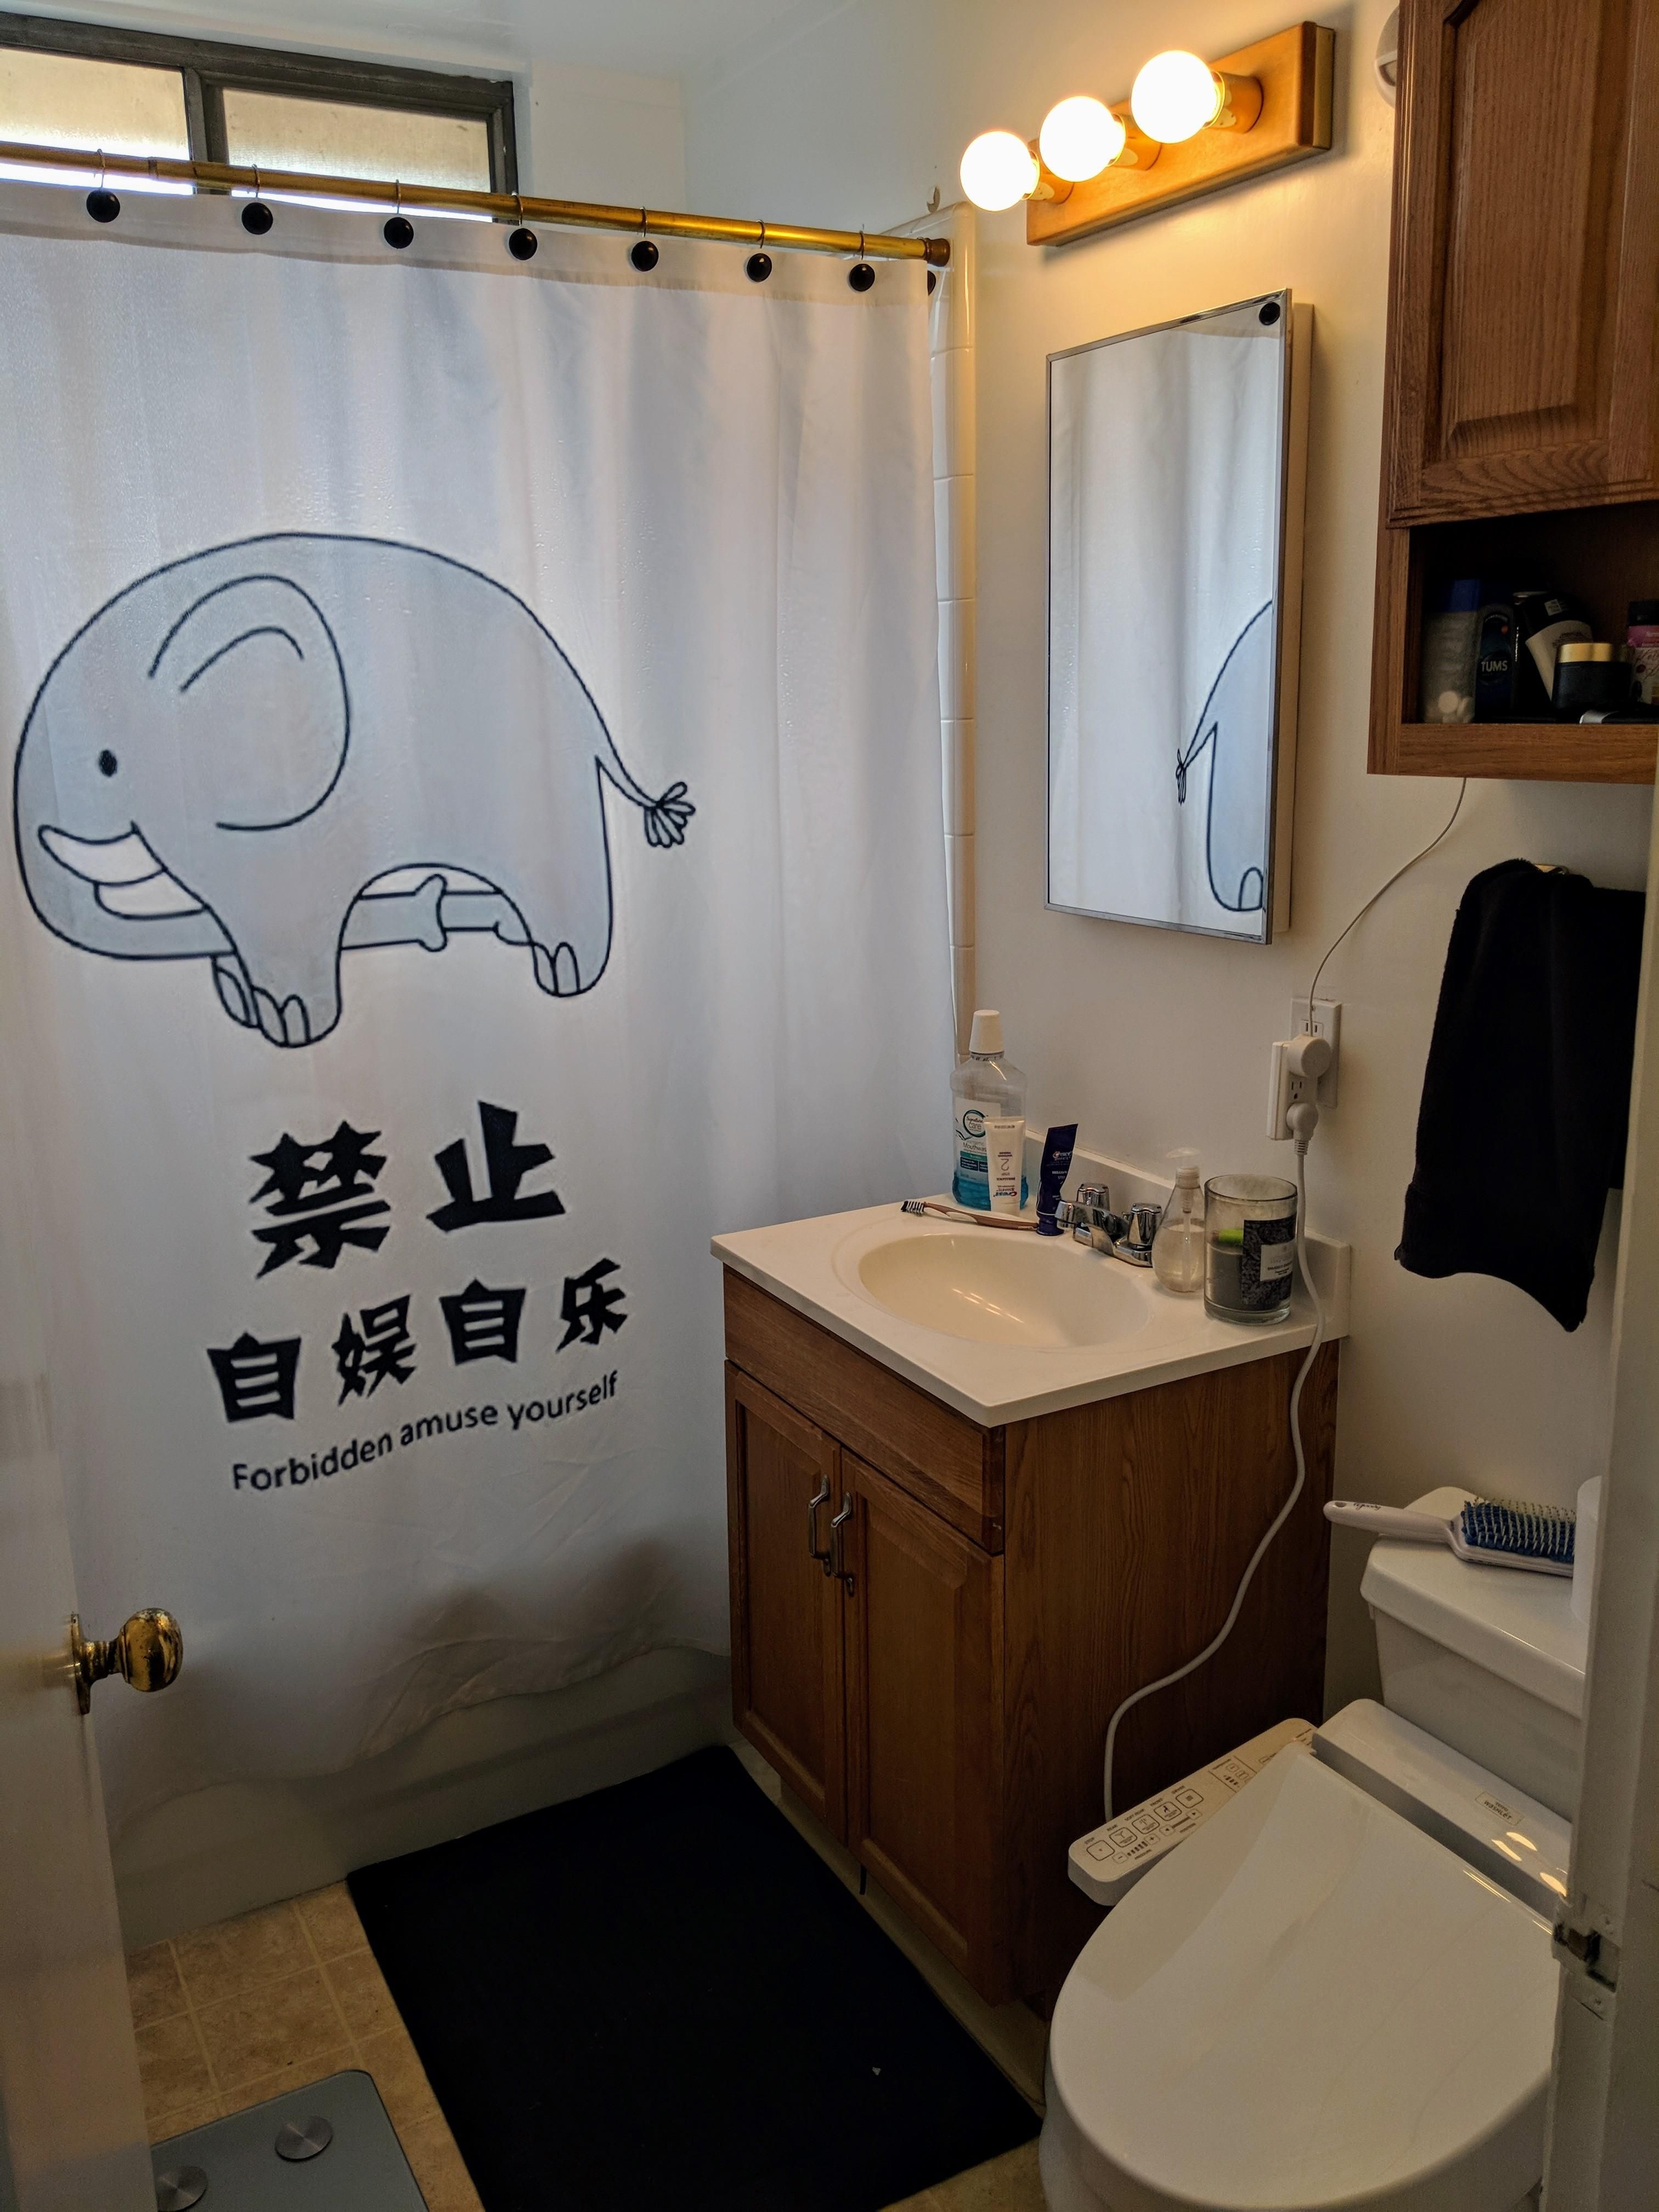 Going to save my shower curtain for my son's bathroom when he gets older.